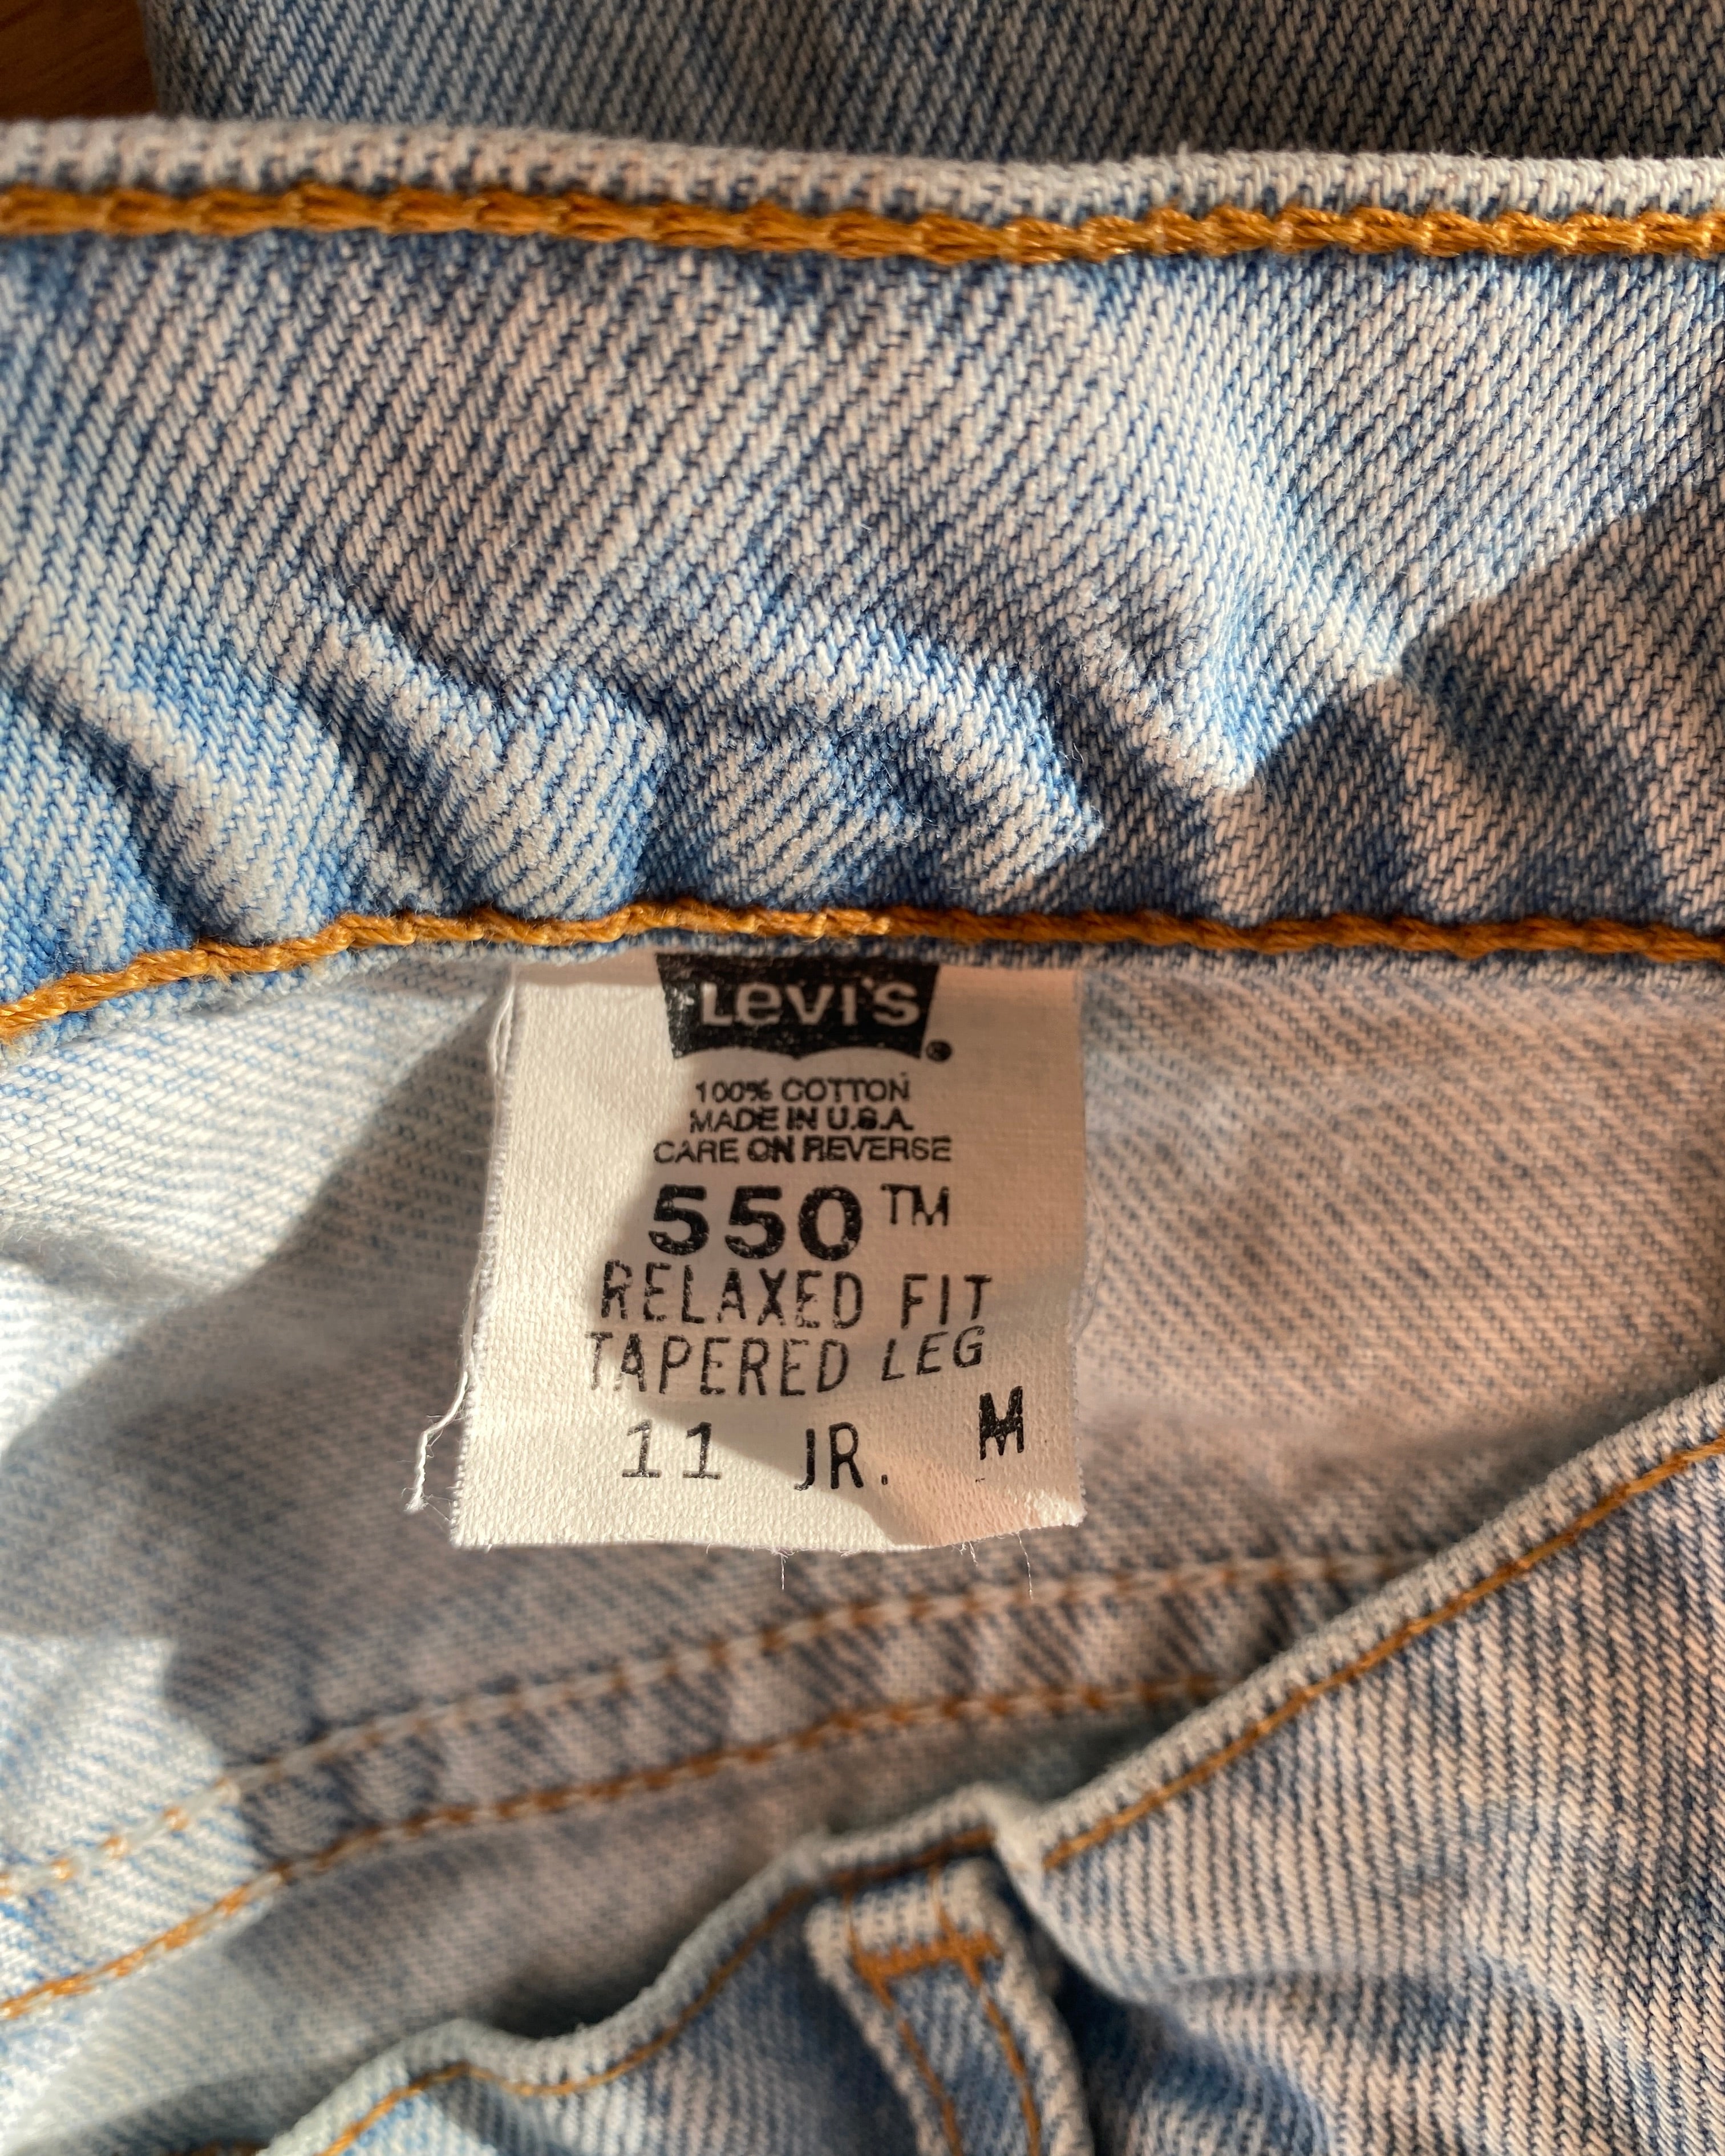 Vintage Levis 550 Light Wash Jeans size 29 Made in USA